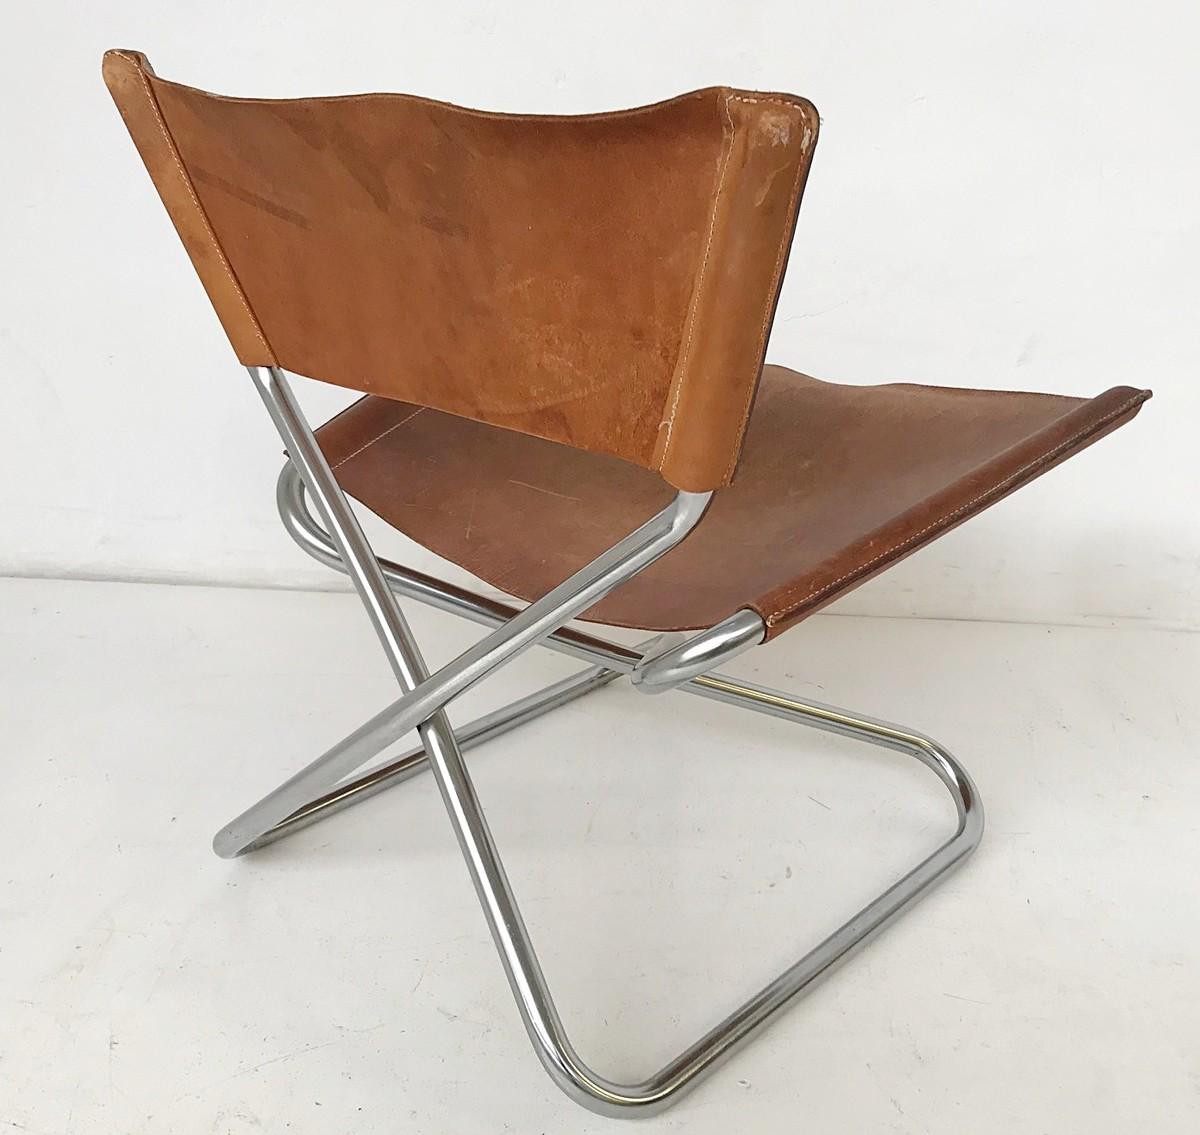 Late 20th Century Chrome and Leather Seat For Sale